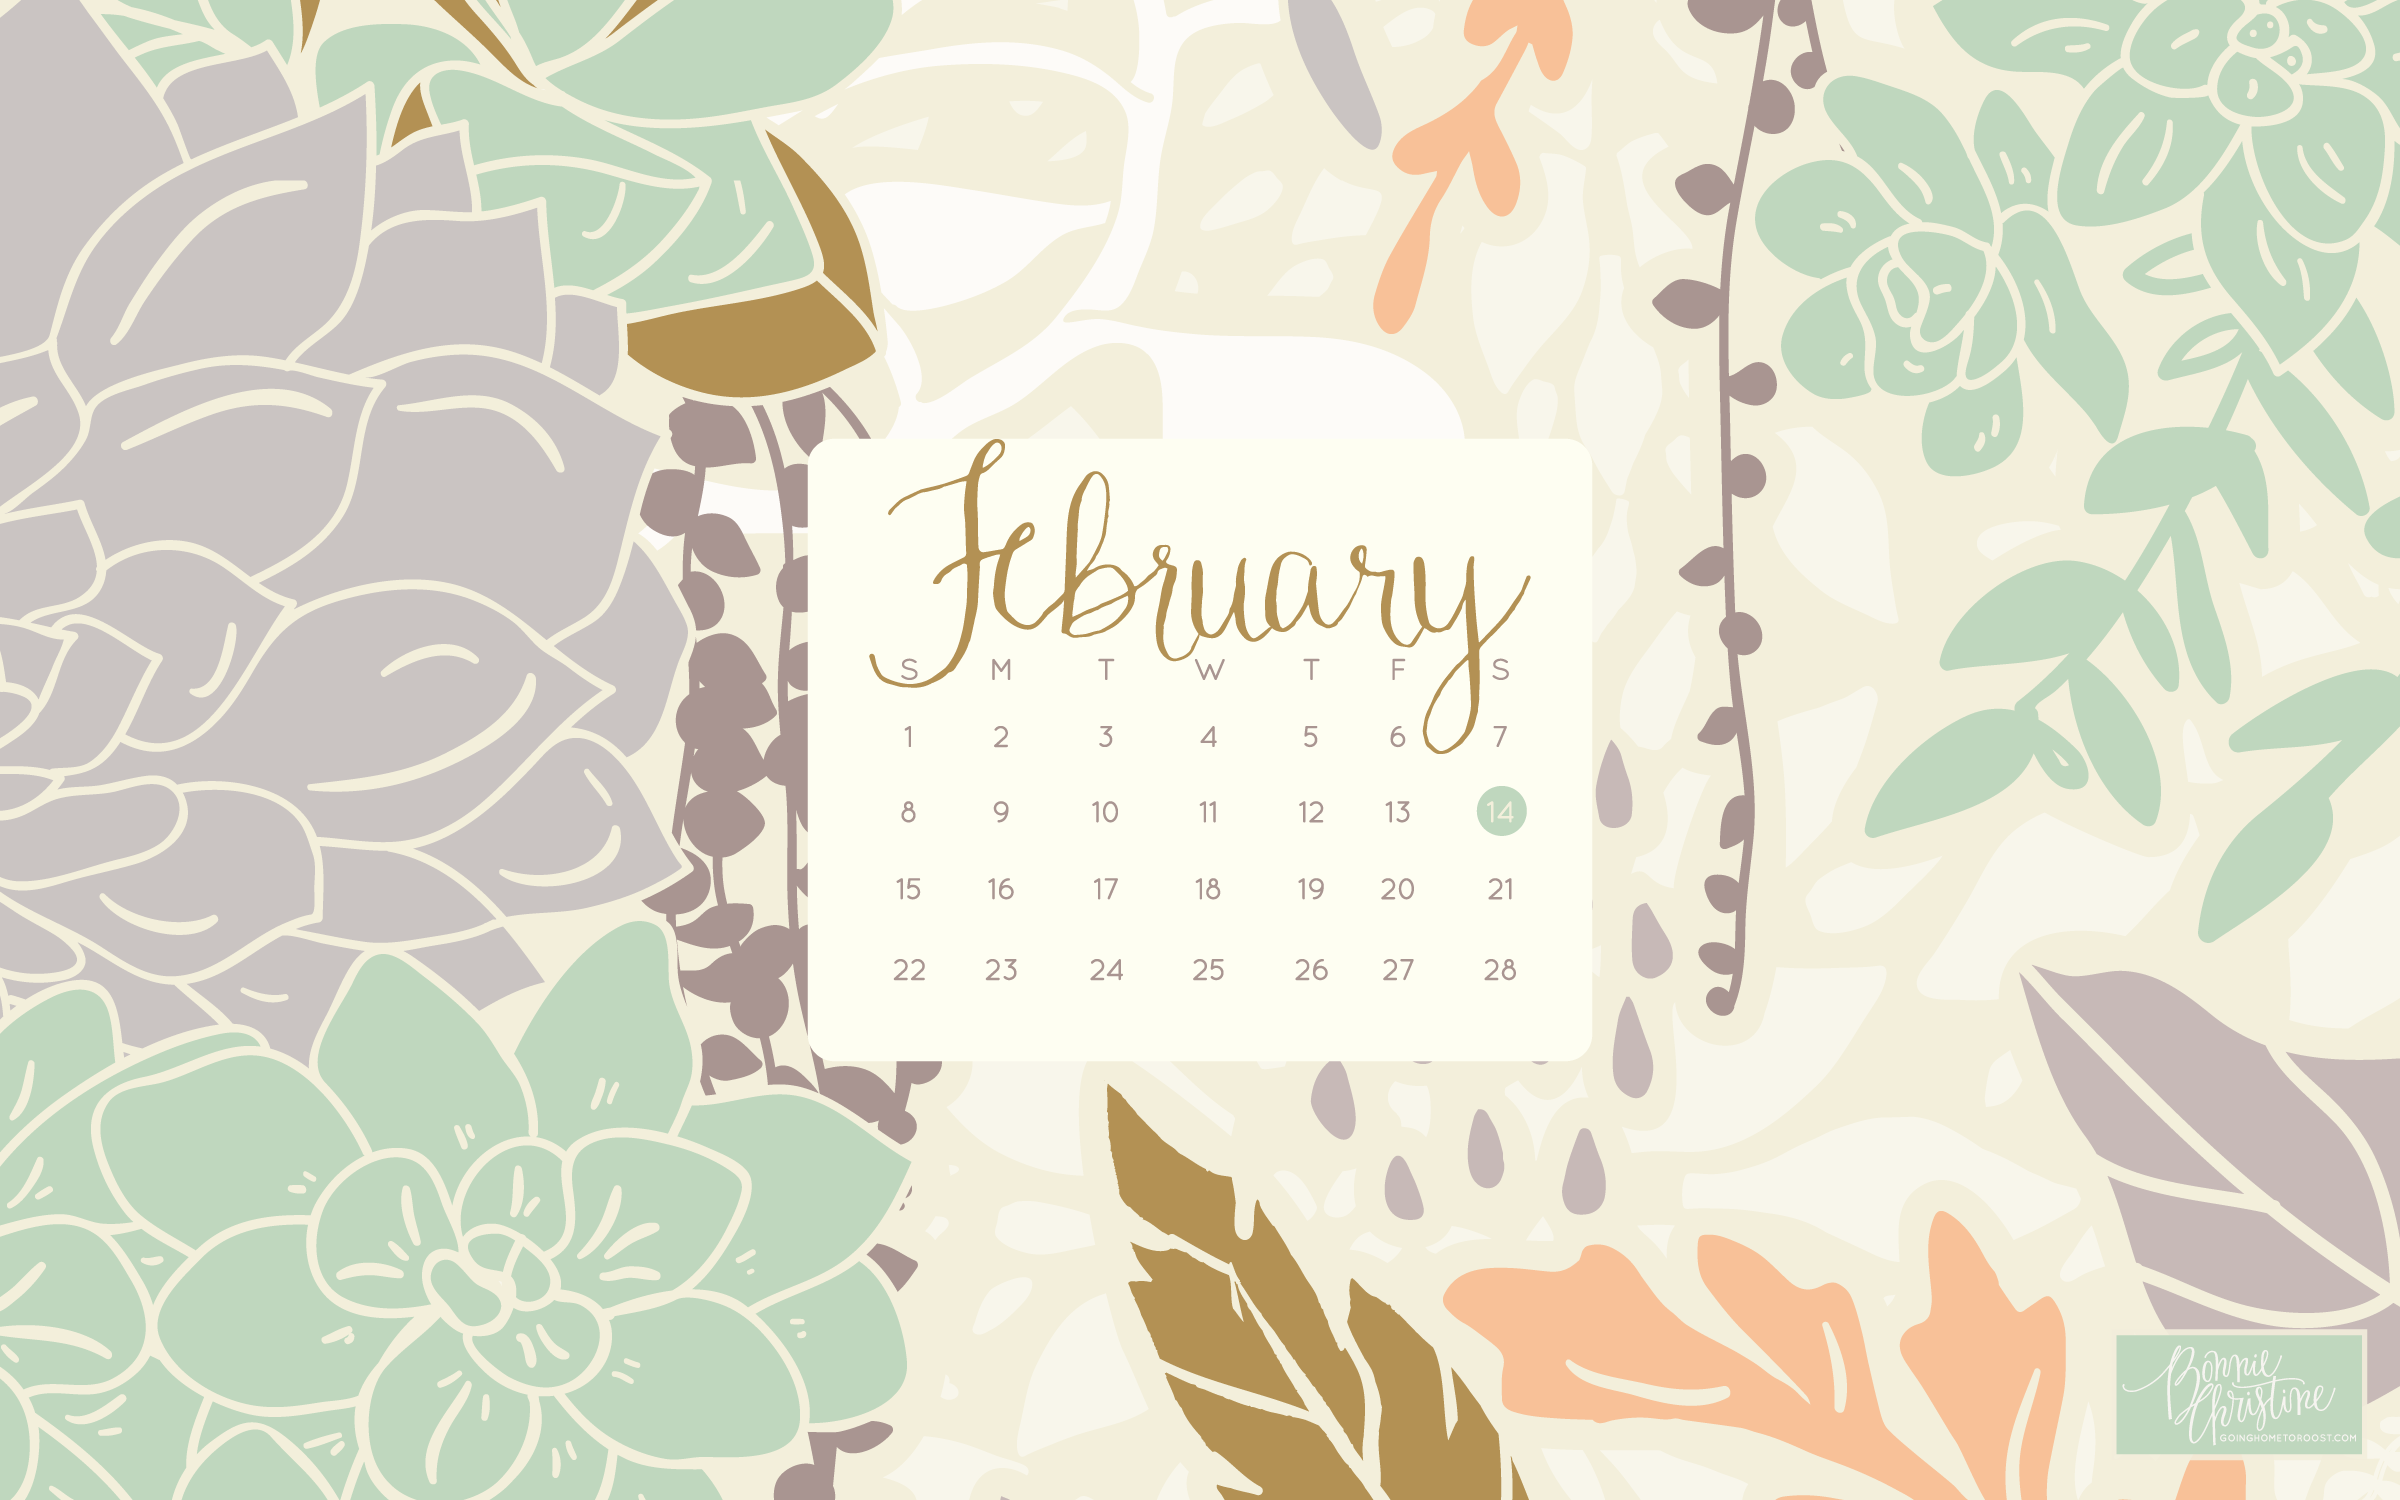 february's desktop + smartphone calendars | going home to roost